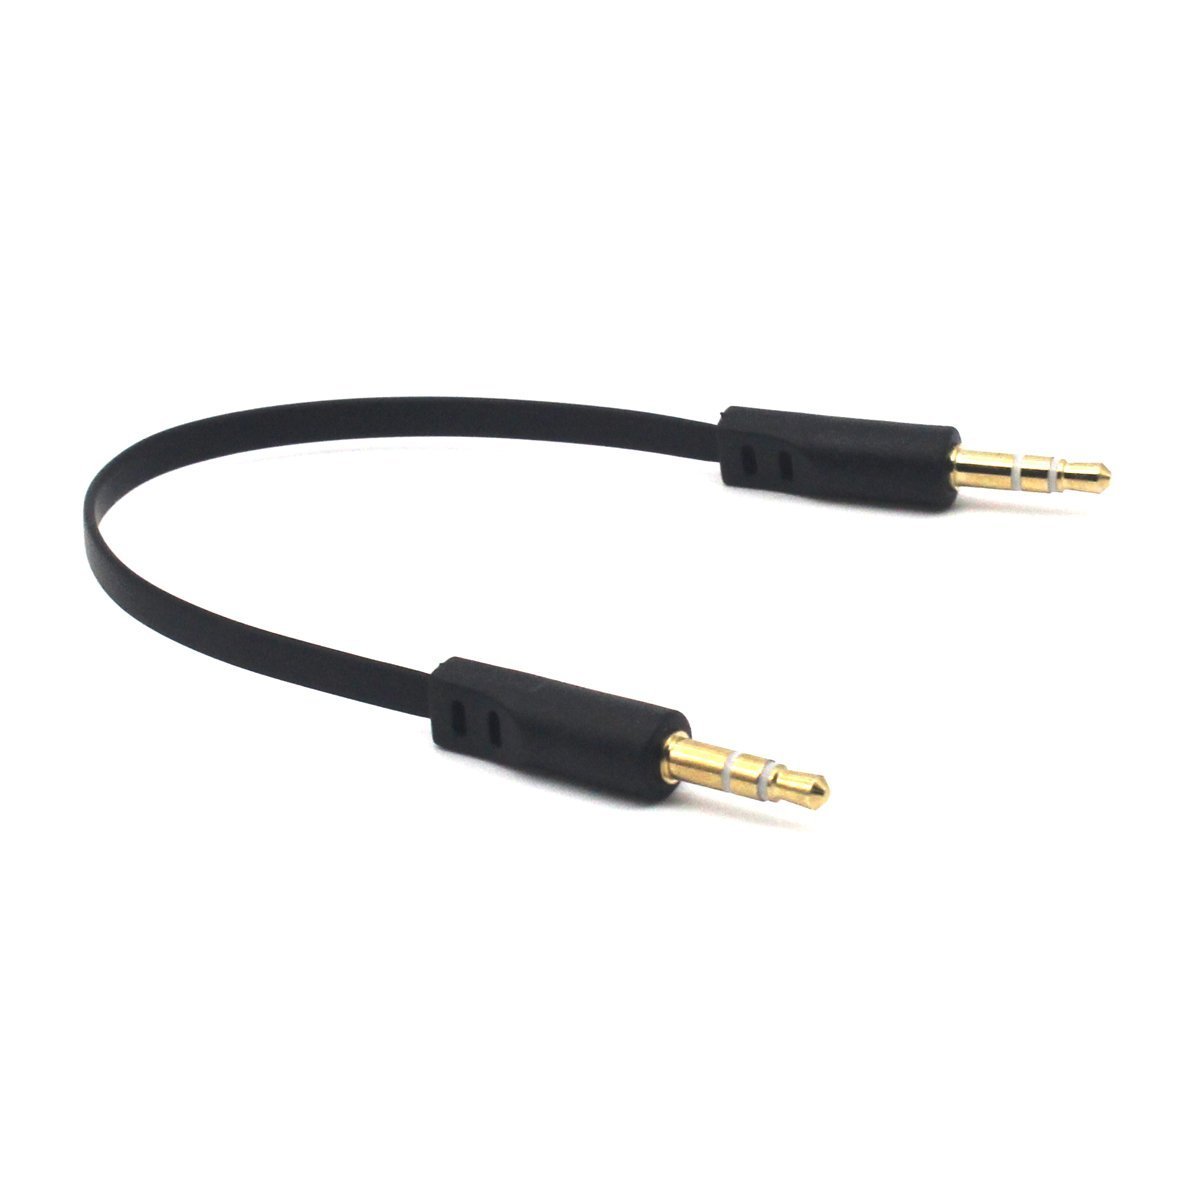 Kework 3.5mm Audio Cable, 2-Pack 15cm 1/8" 3.5mm TRS Male to TRS Male Stereo Jack Audio Cable AUX Cord for Headphone, Car Stereo, Home Stereo and More (Straight Plug)